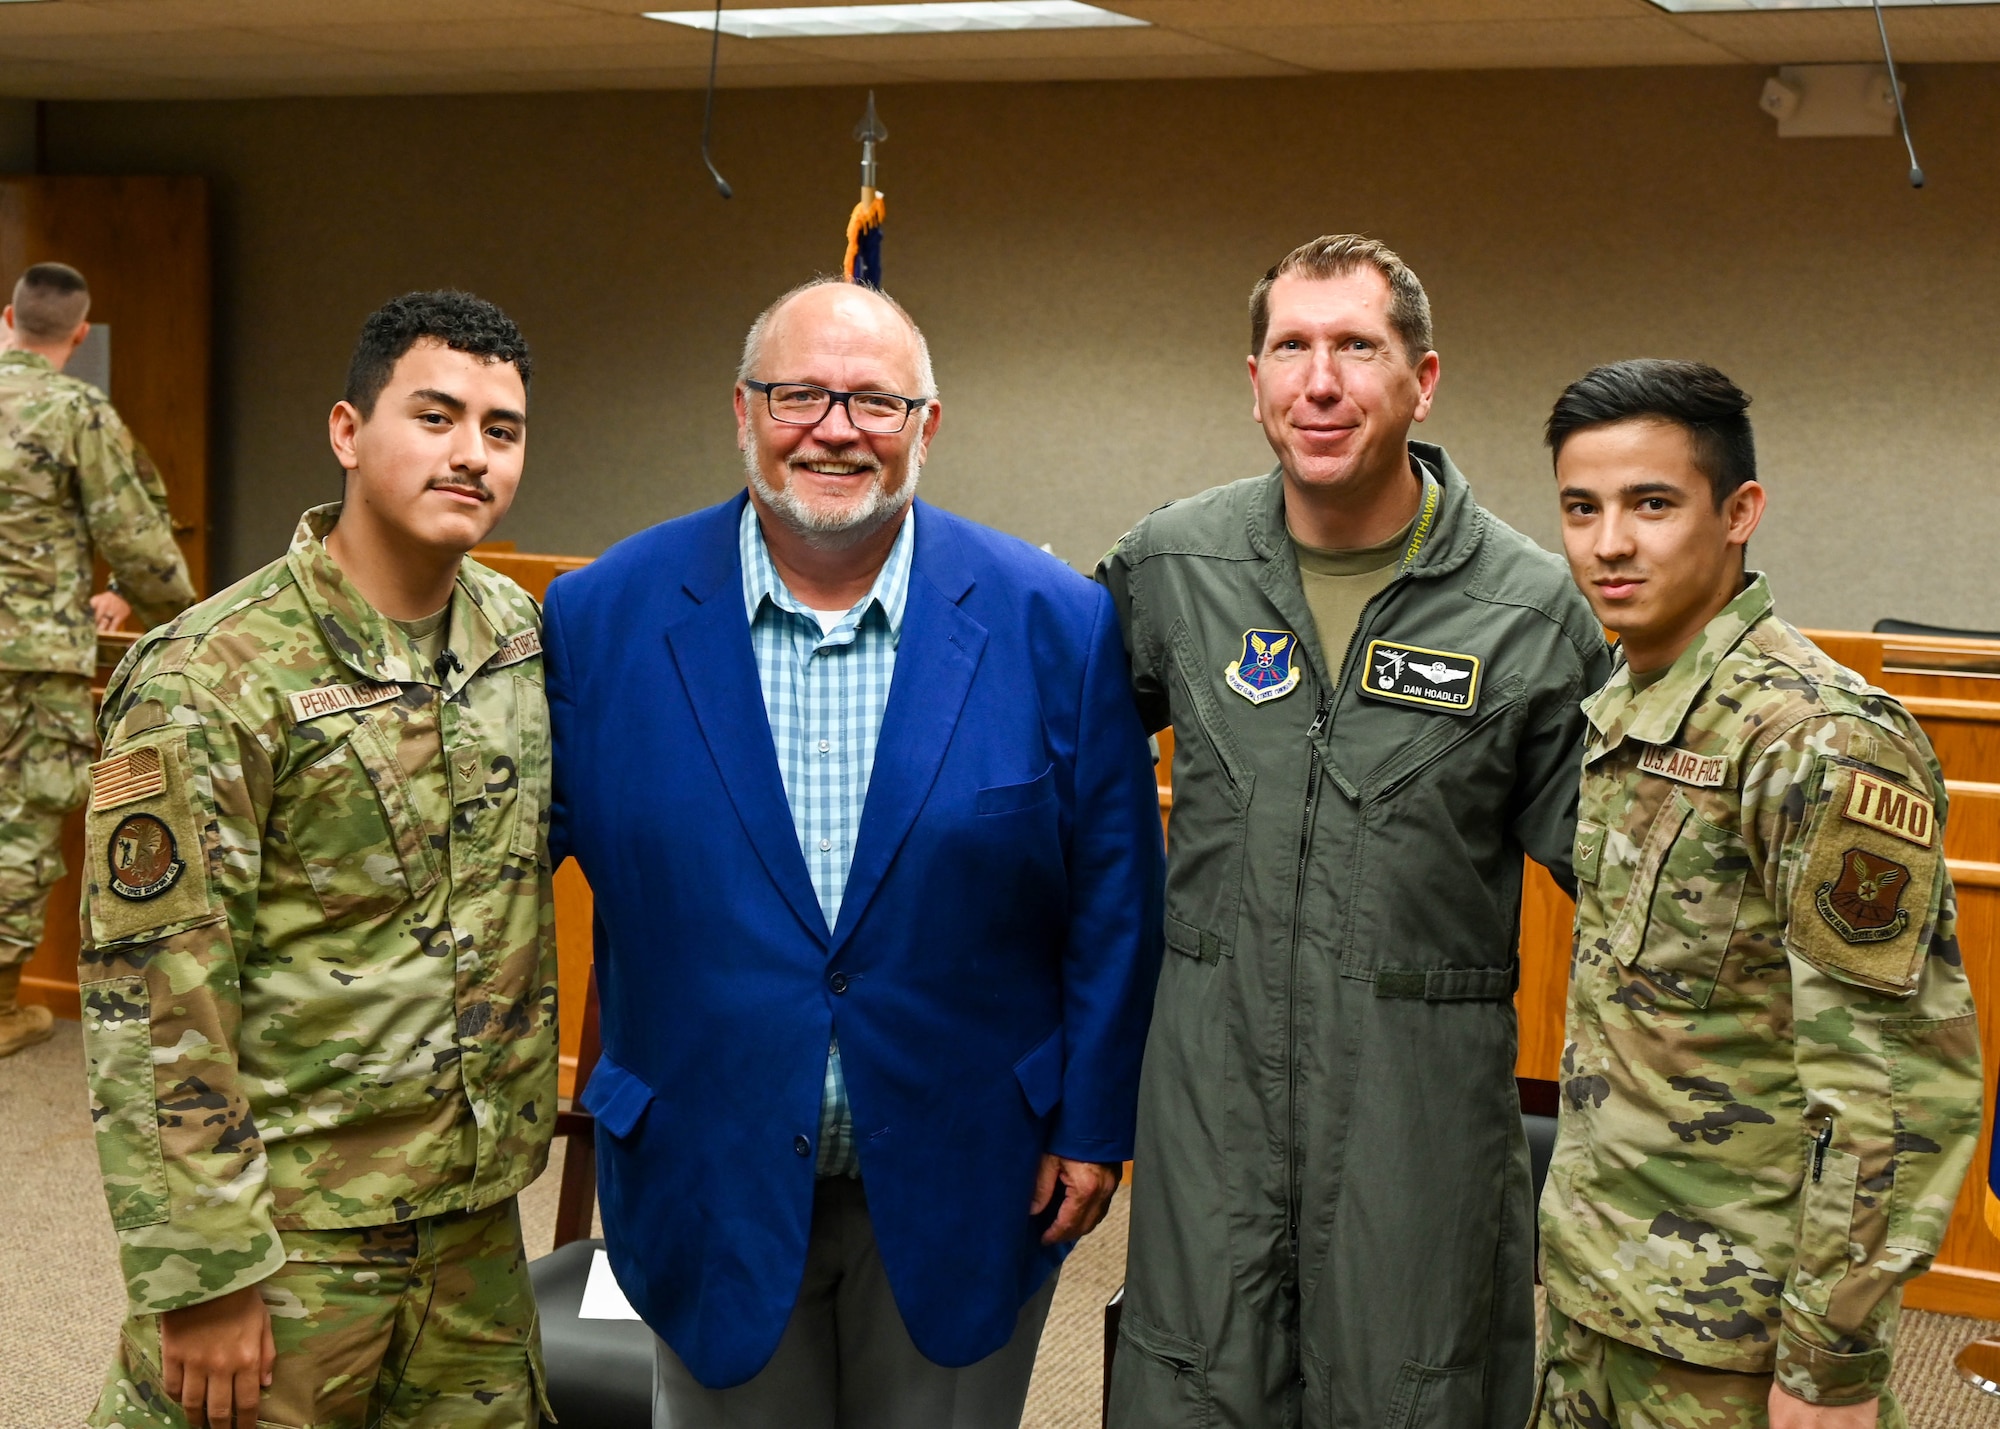 Airman 1st Class Jorge Peralta, a 5th Force Support Squadron classification technician, Tom Ross, mayor of Minot, Col. Daniel Hoadley, 5th Bomb Wing commander and, Airman Amin Ahmadi, a 5th Logistics Readiness Squadron traffic management office apprentice, pose for photo after a naturalization ceremony at Minot Air Force Base, N.D., Aug 31, 2022. Ahmadi and Peralta participated in the first naturalization ceremony held at Minot Air Force Base. For more than 200 years the oath has been recited by many Americans on their pathway to citizenship.  (U.S. Air Force photo by Senior Airman Evan Lichtenhan)